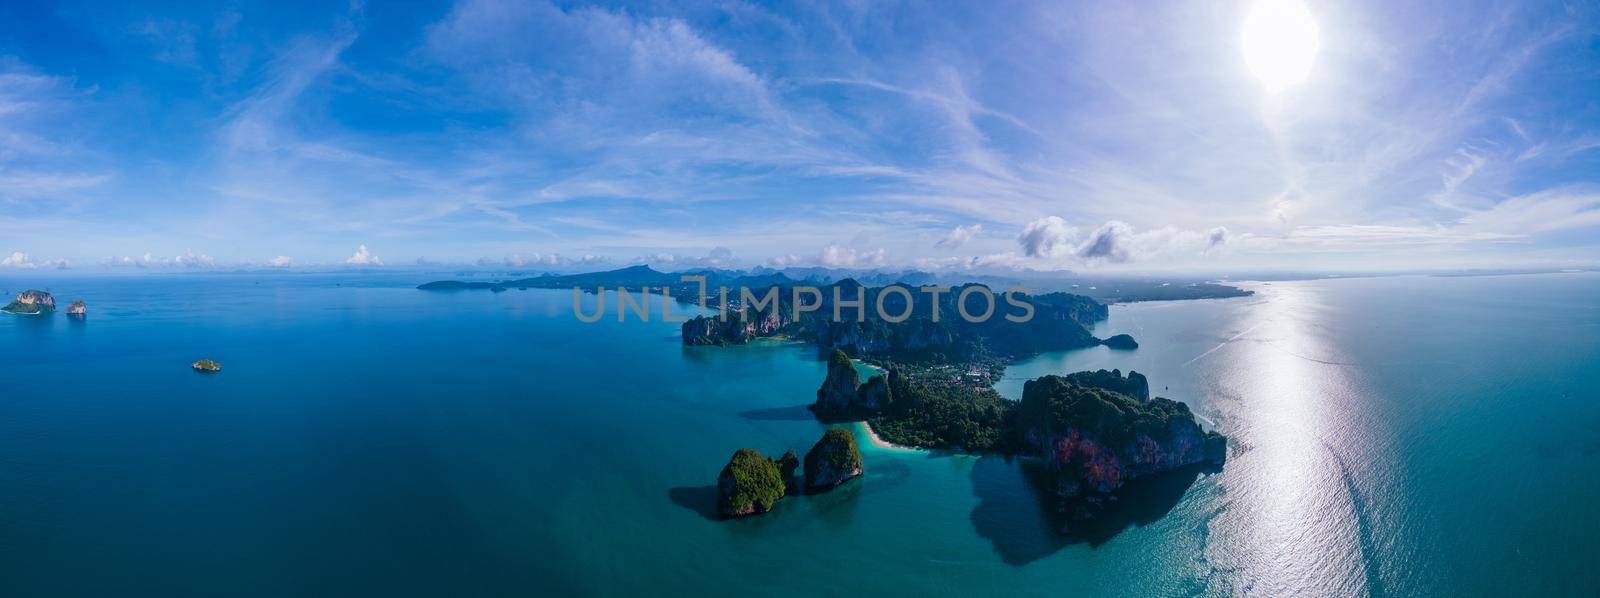 Railay beach Krabi Thailand, tropical beach of Railay Krabi, Panoramic view of idyllic Railay Beach in Thailand with a traditional long boat by fokkebok